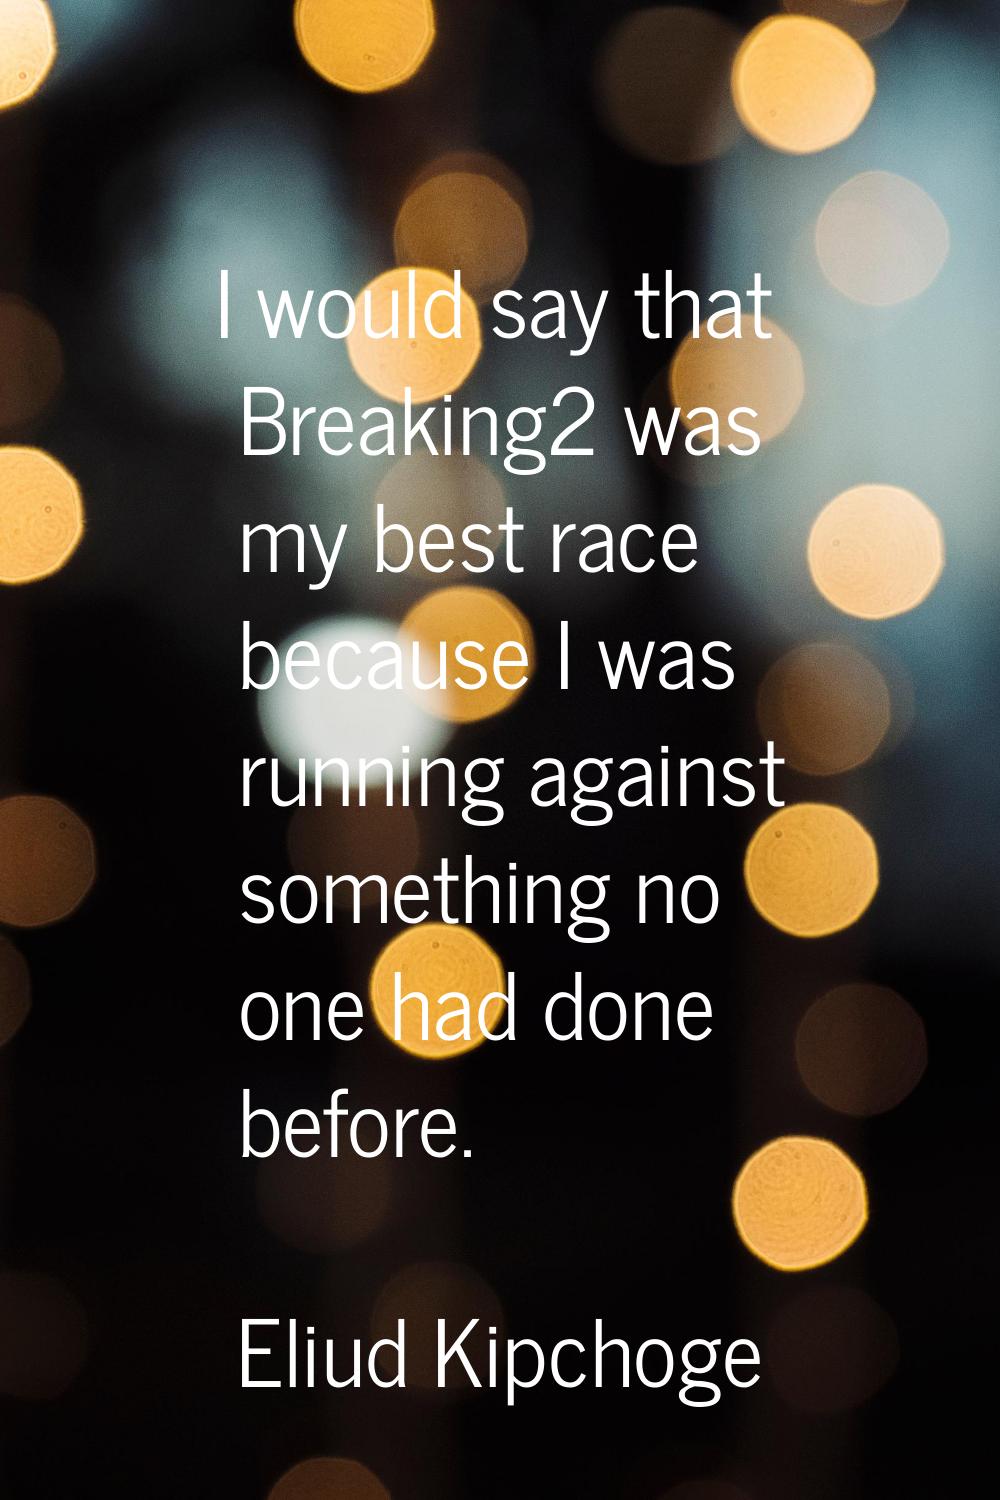 I would say that Breaking2 was my best race because I was running against something no one had done